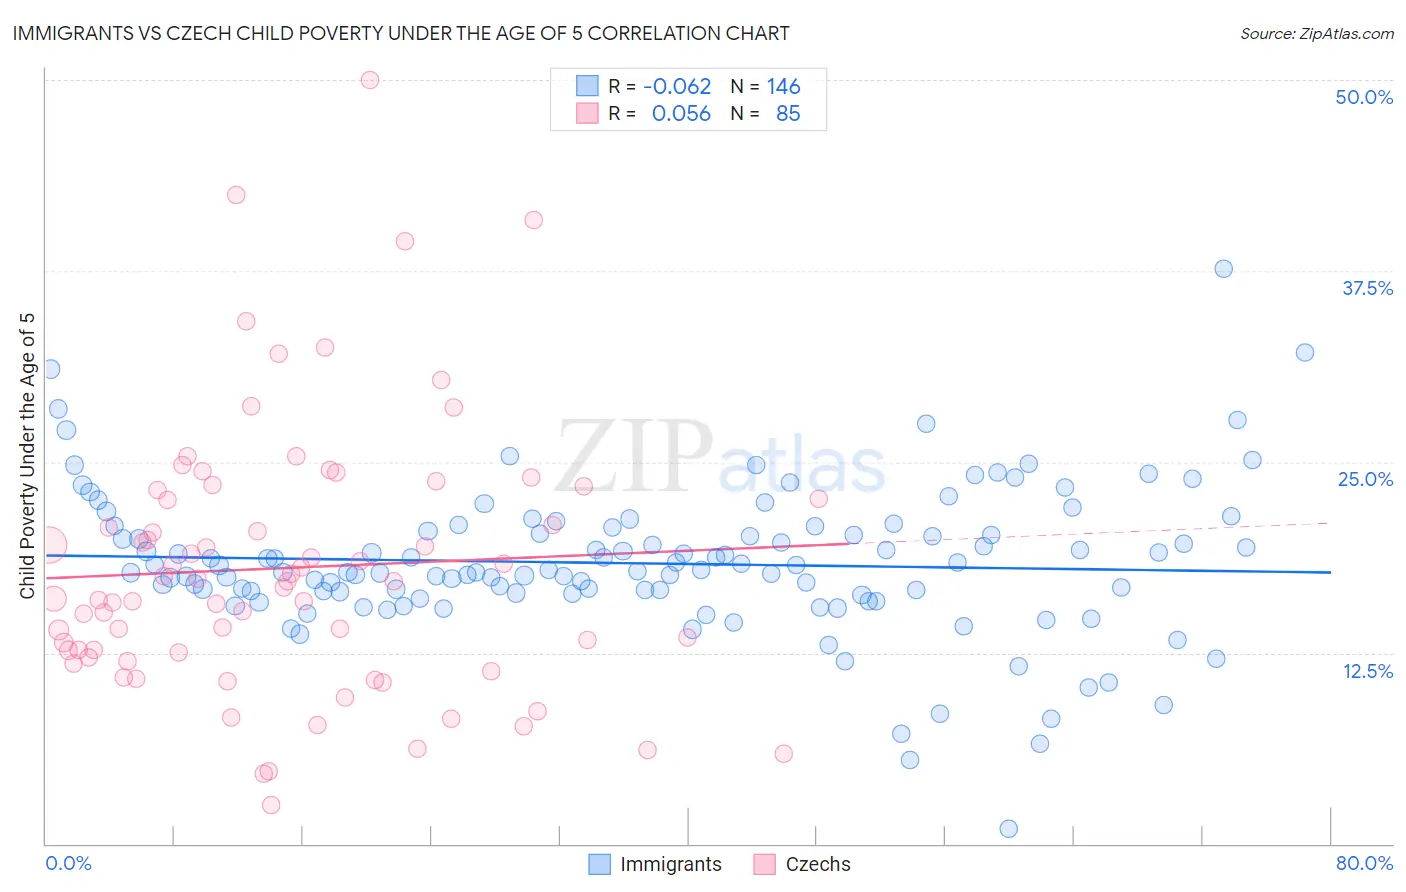 Immigrants vs Czech Child Poverty Under the Age of 5